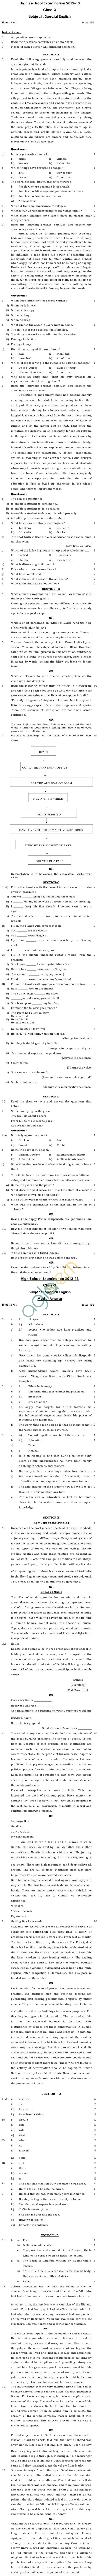 MP Board Class X English Special Model Questions & Answers - Set 1